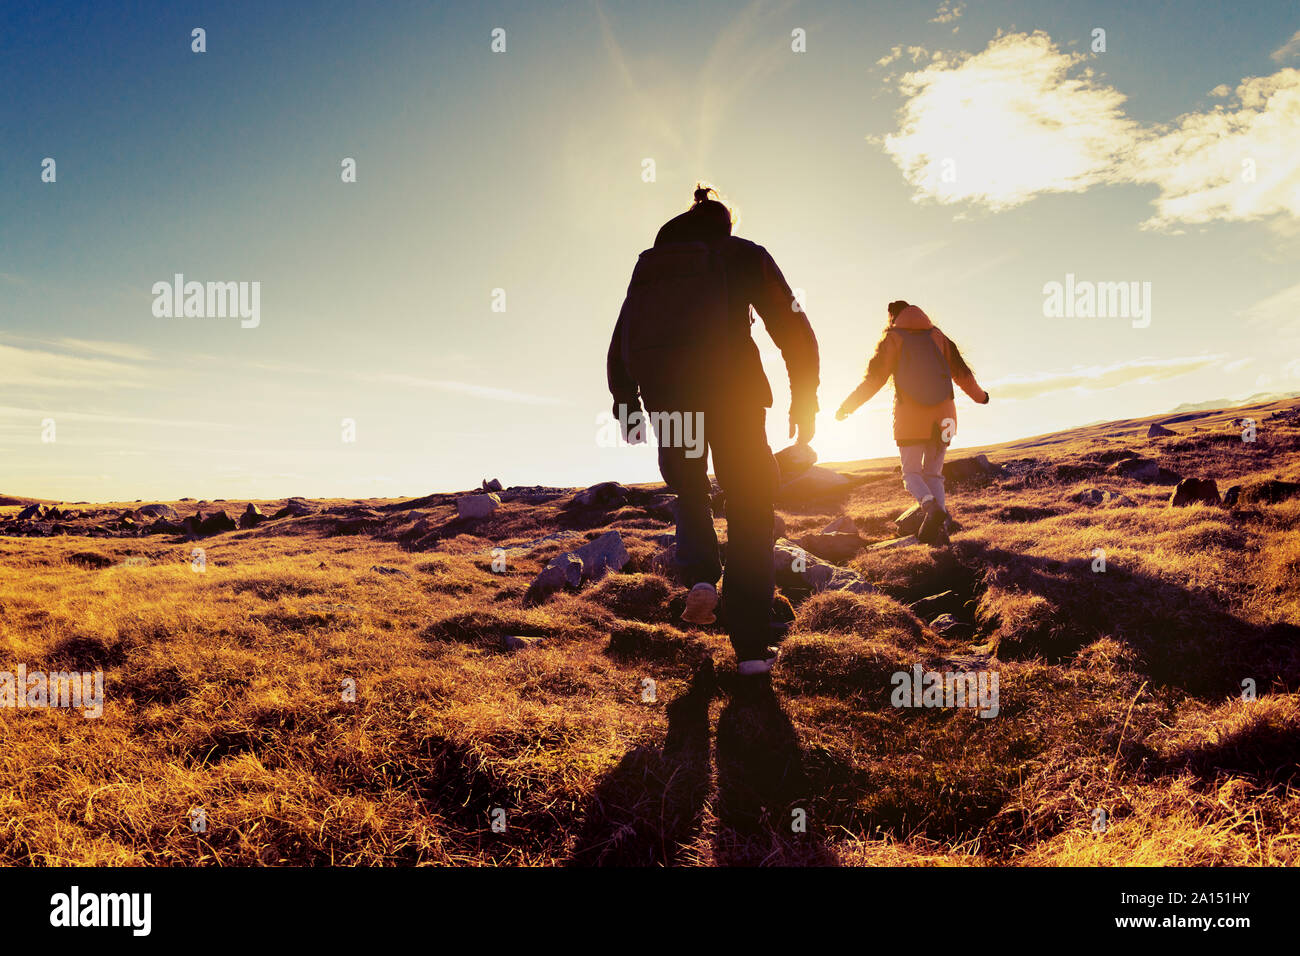 Silhouettes of two hikers walks in sunset light. Trekking concept Stock Photo